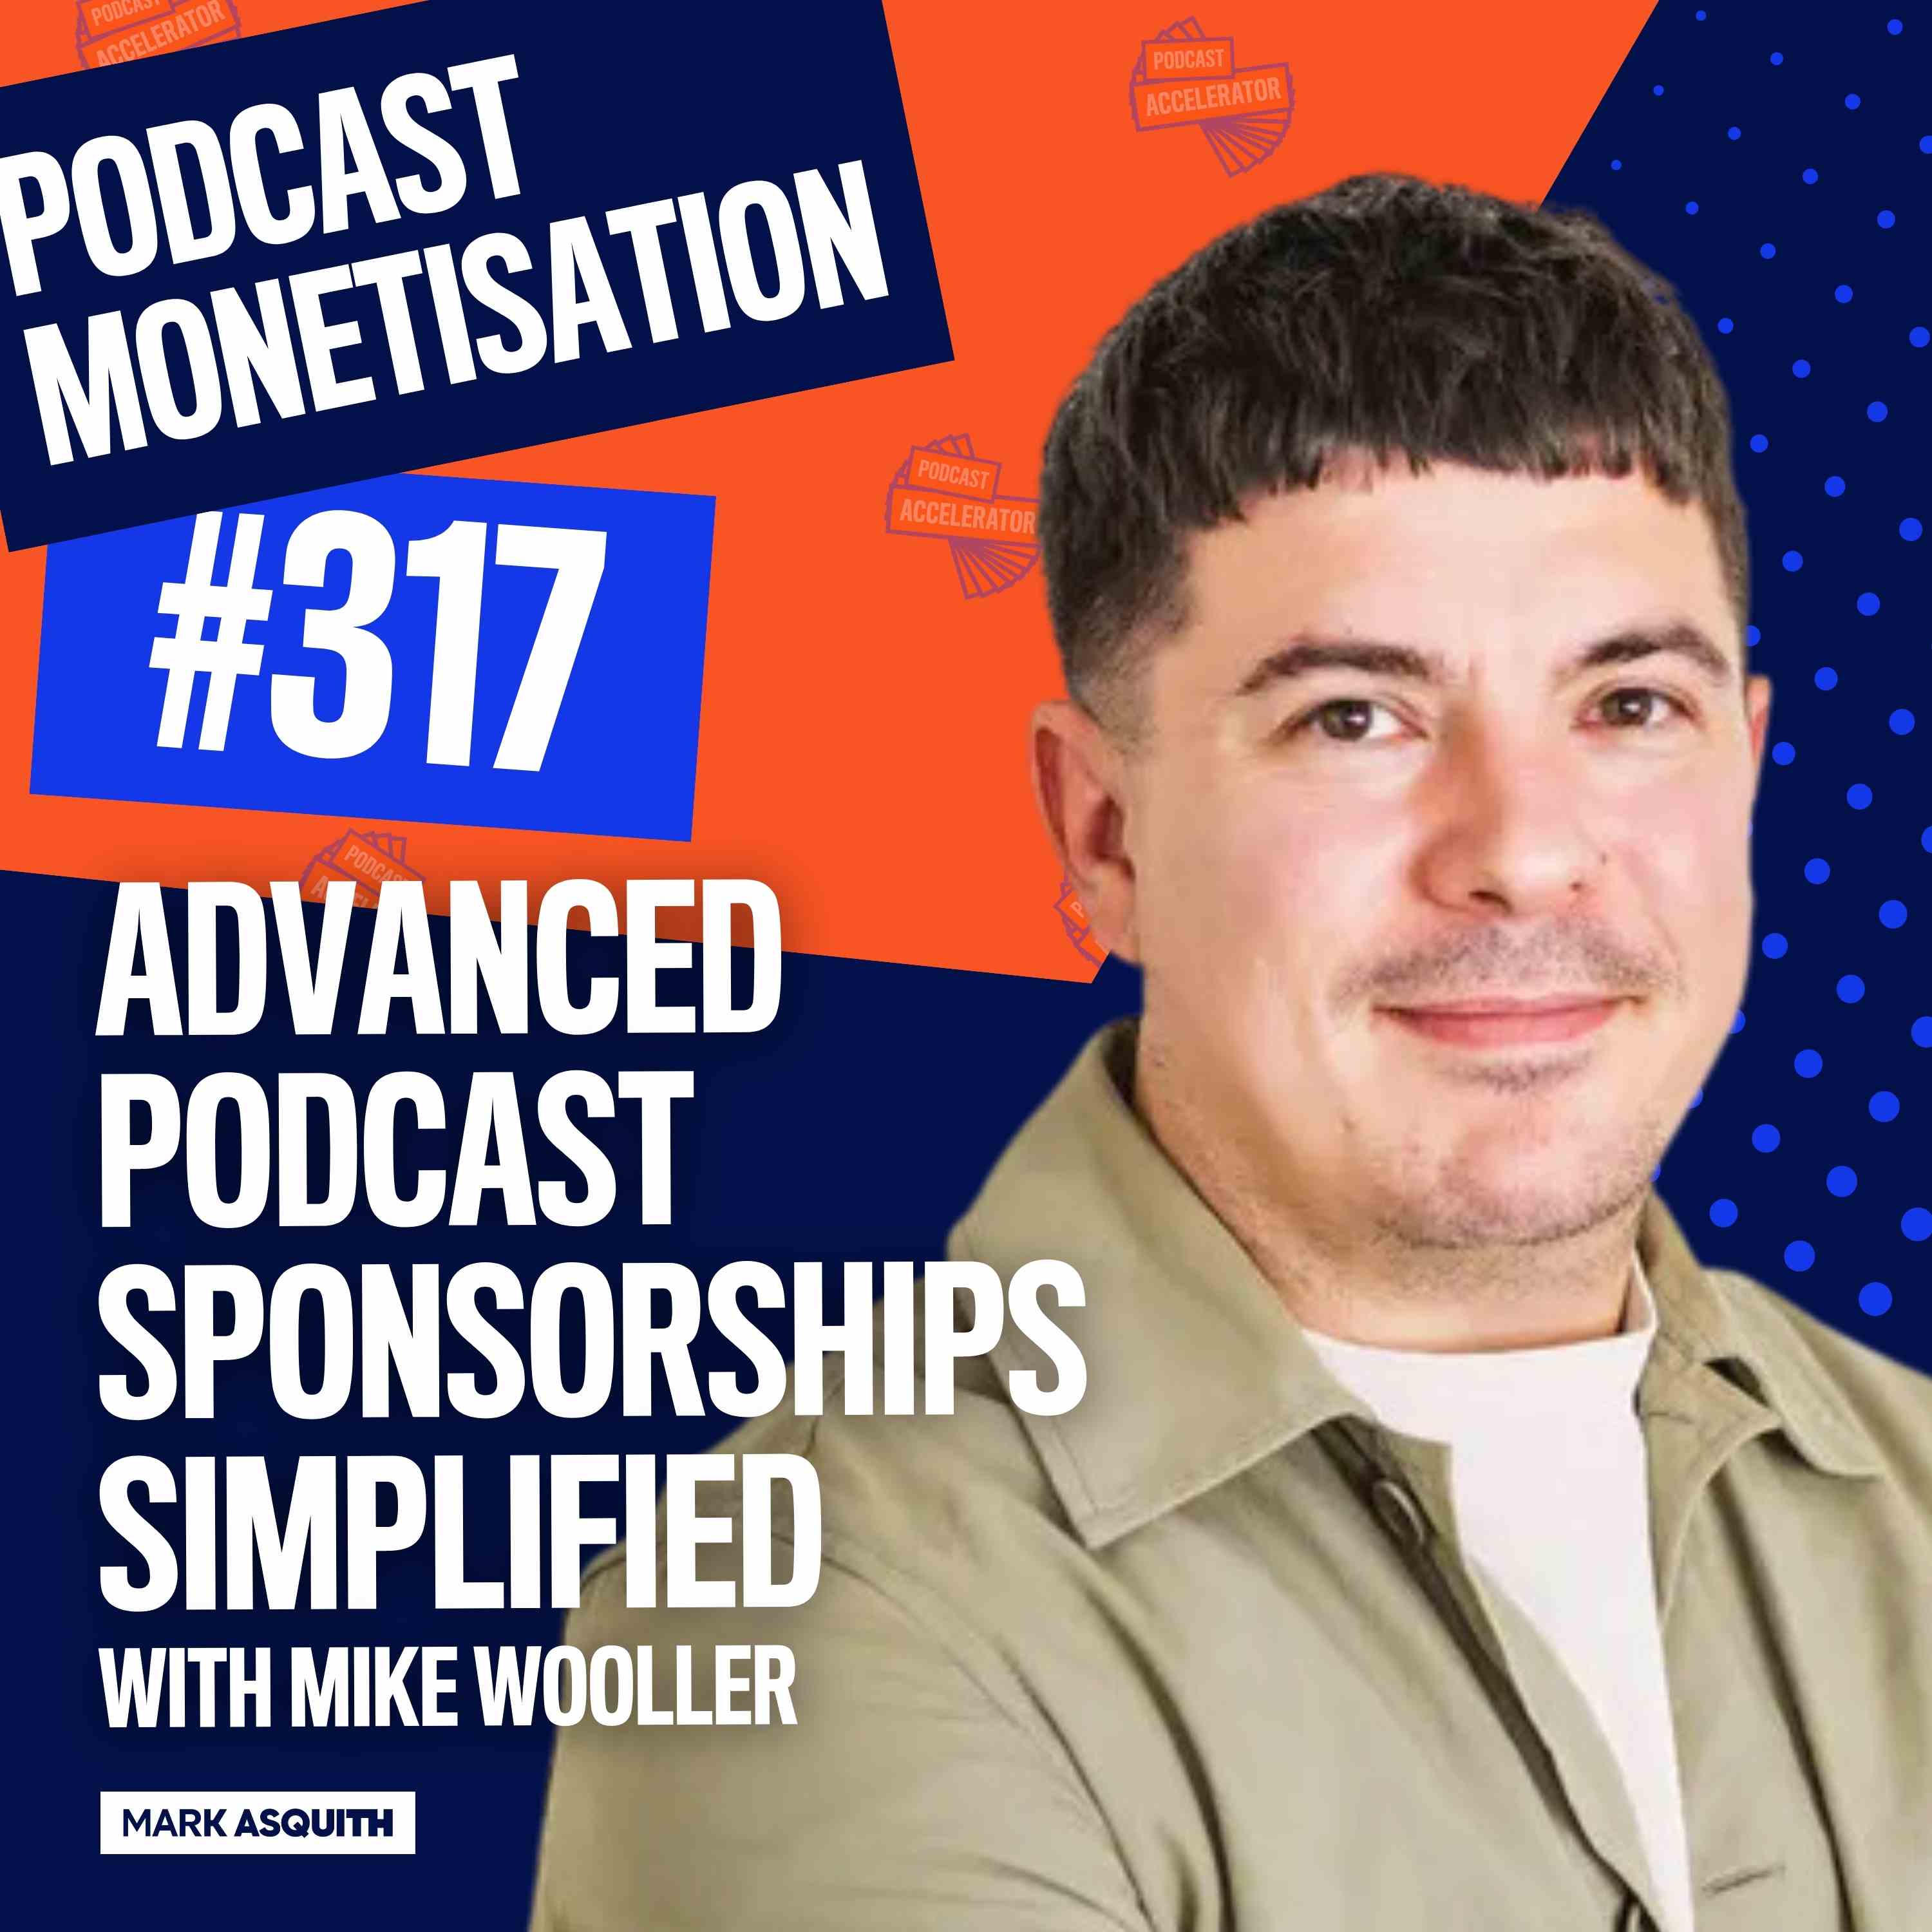 Advanced Podcast Sponsorships Simplified with Mike Wooller